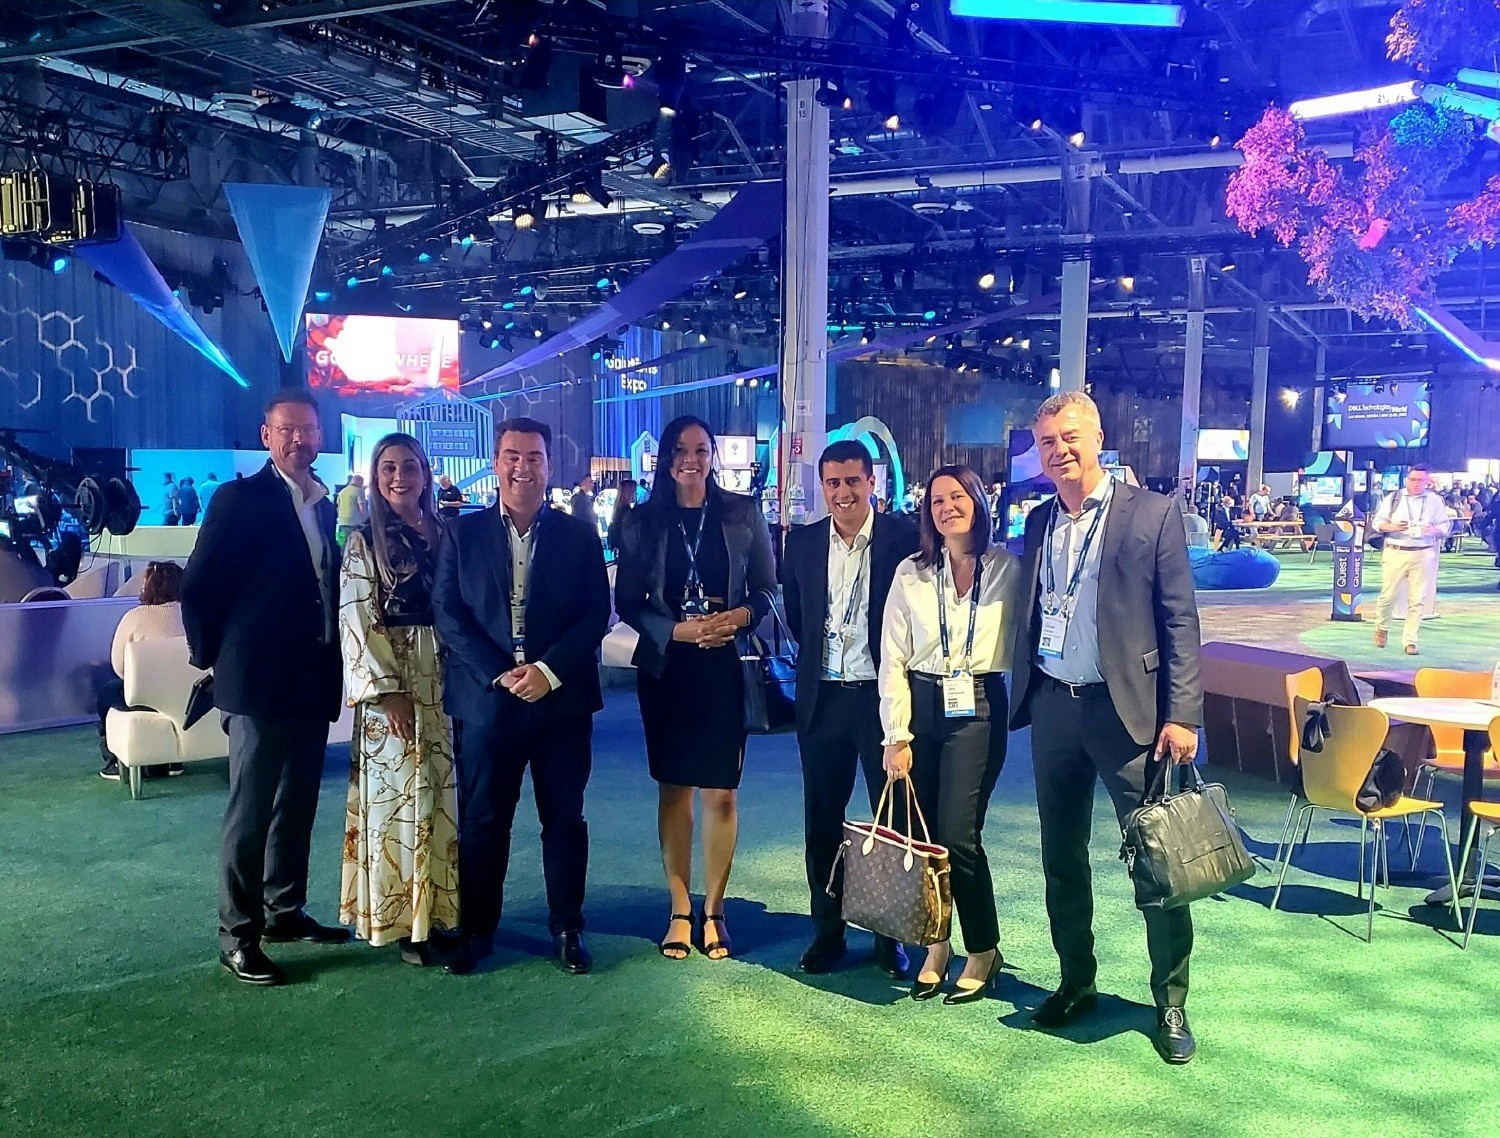 Atos team members in Las Vegas at Dell Technologies World 2022